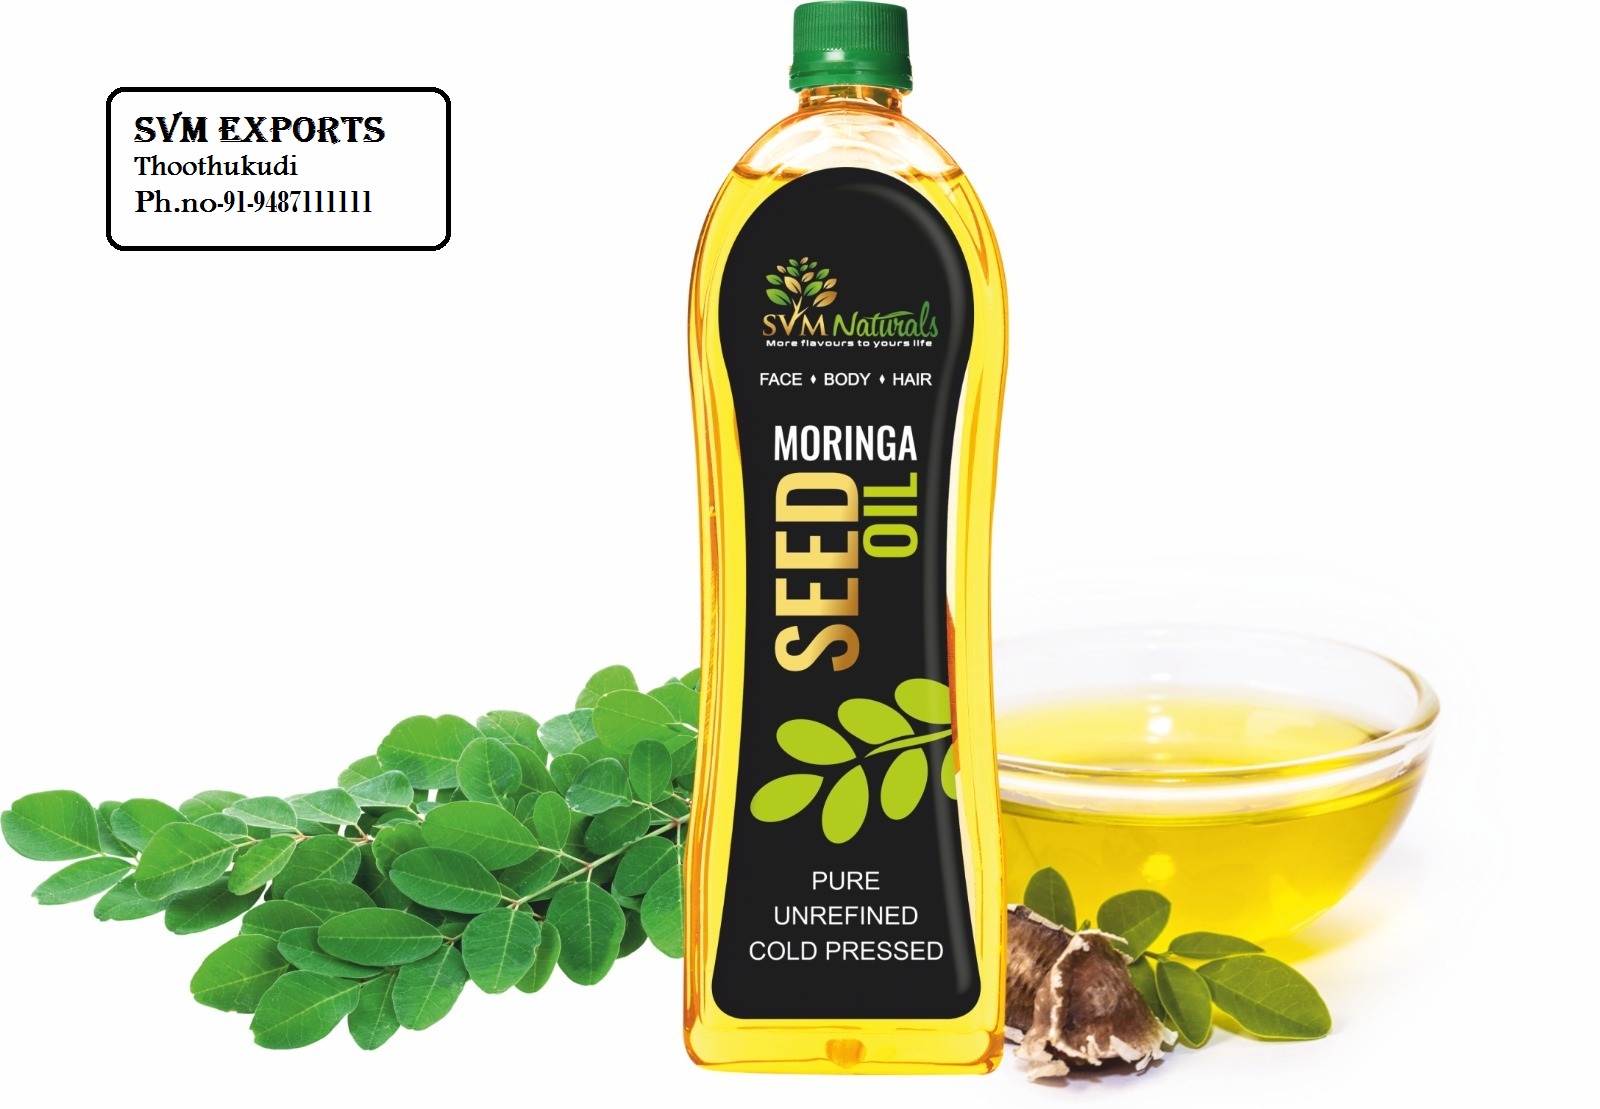 SVM EXPORTS
Thoothukudi
Ph.no-91-9487111111

UNREFINED
COLD PRESSED

 

\